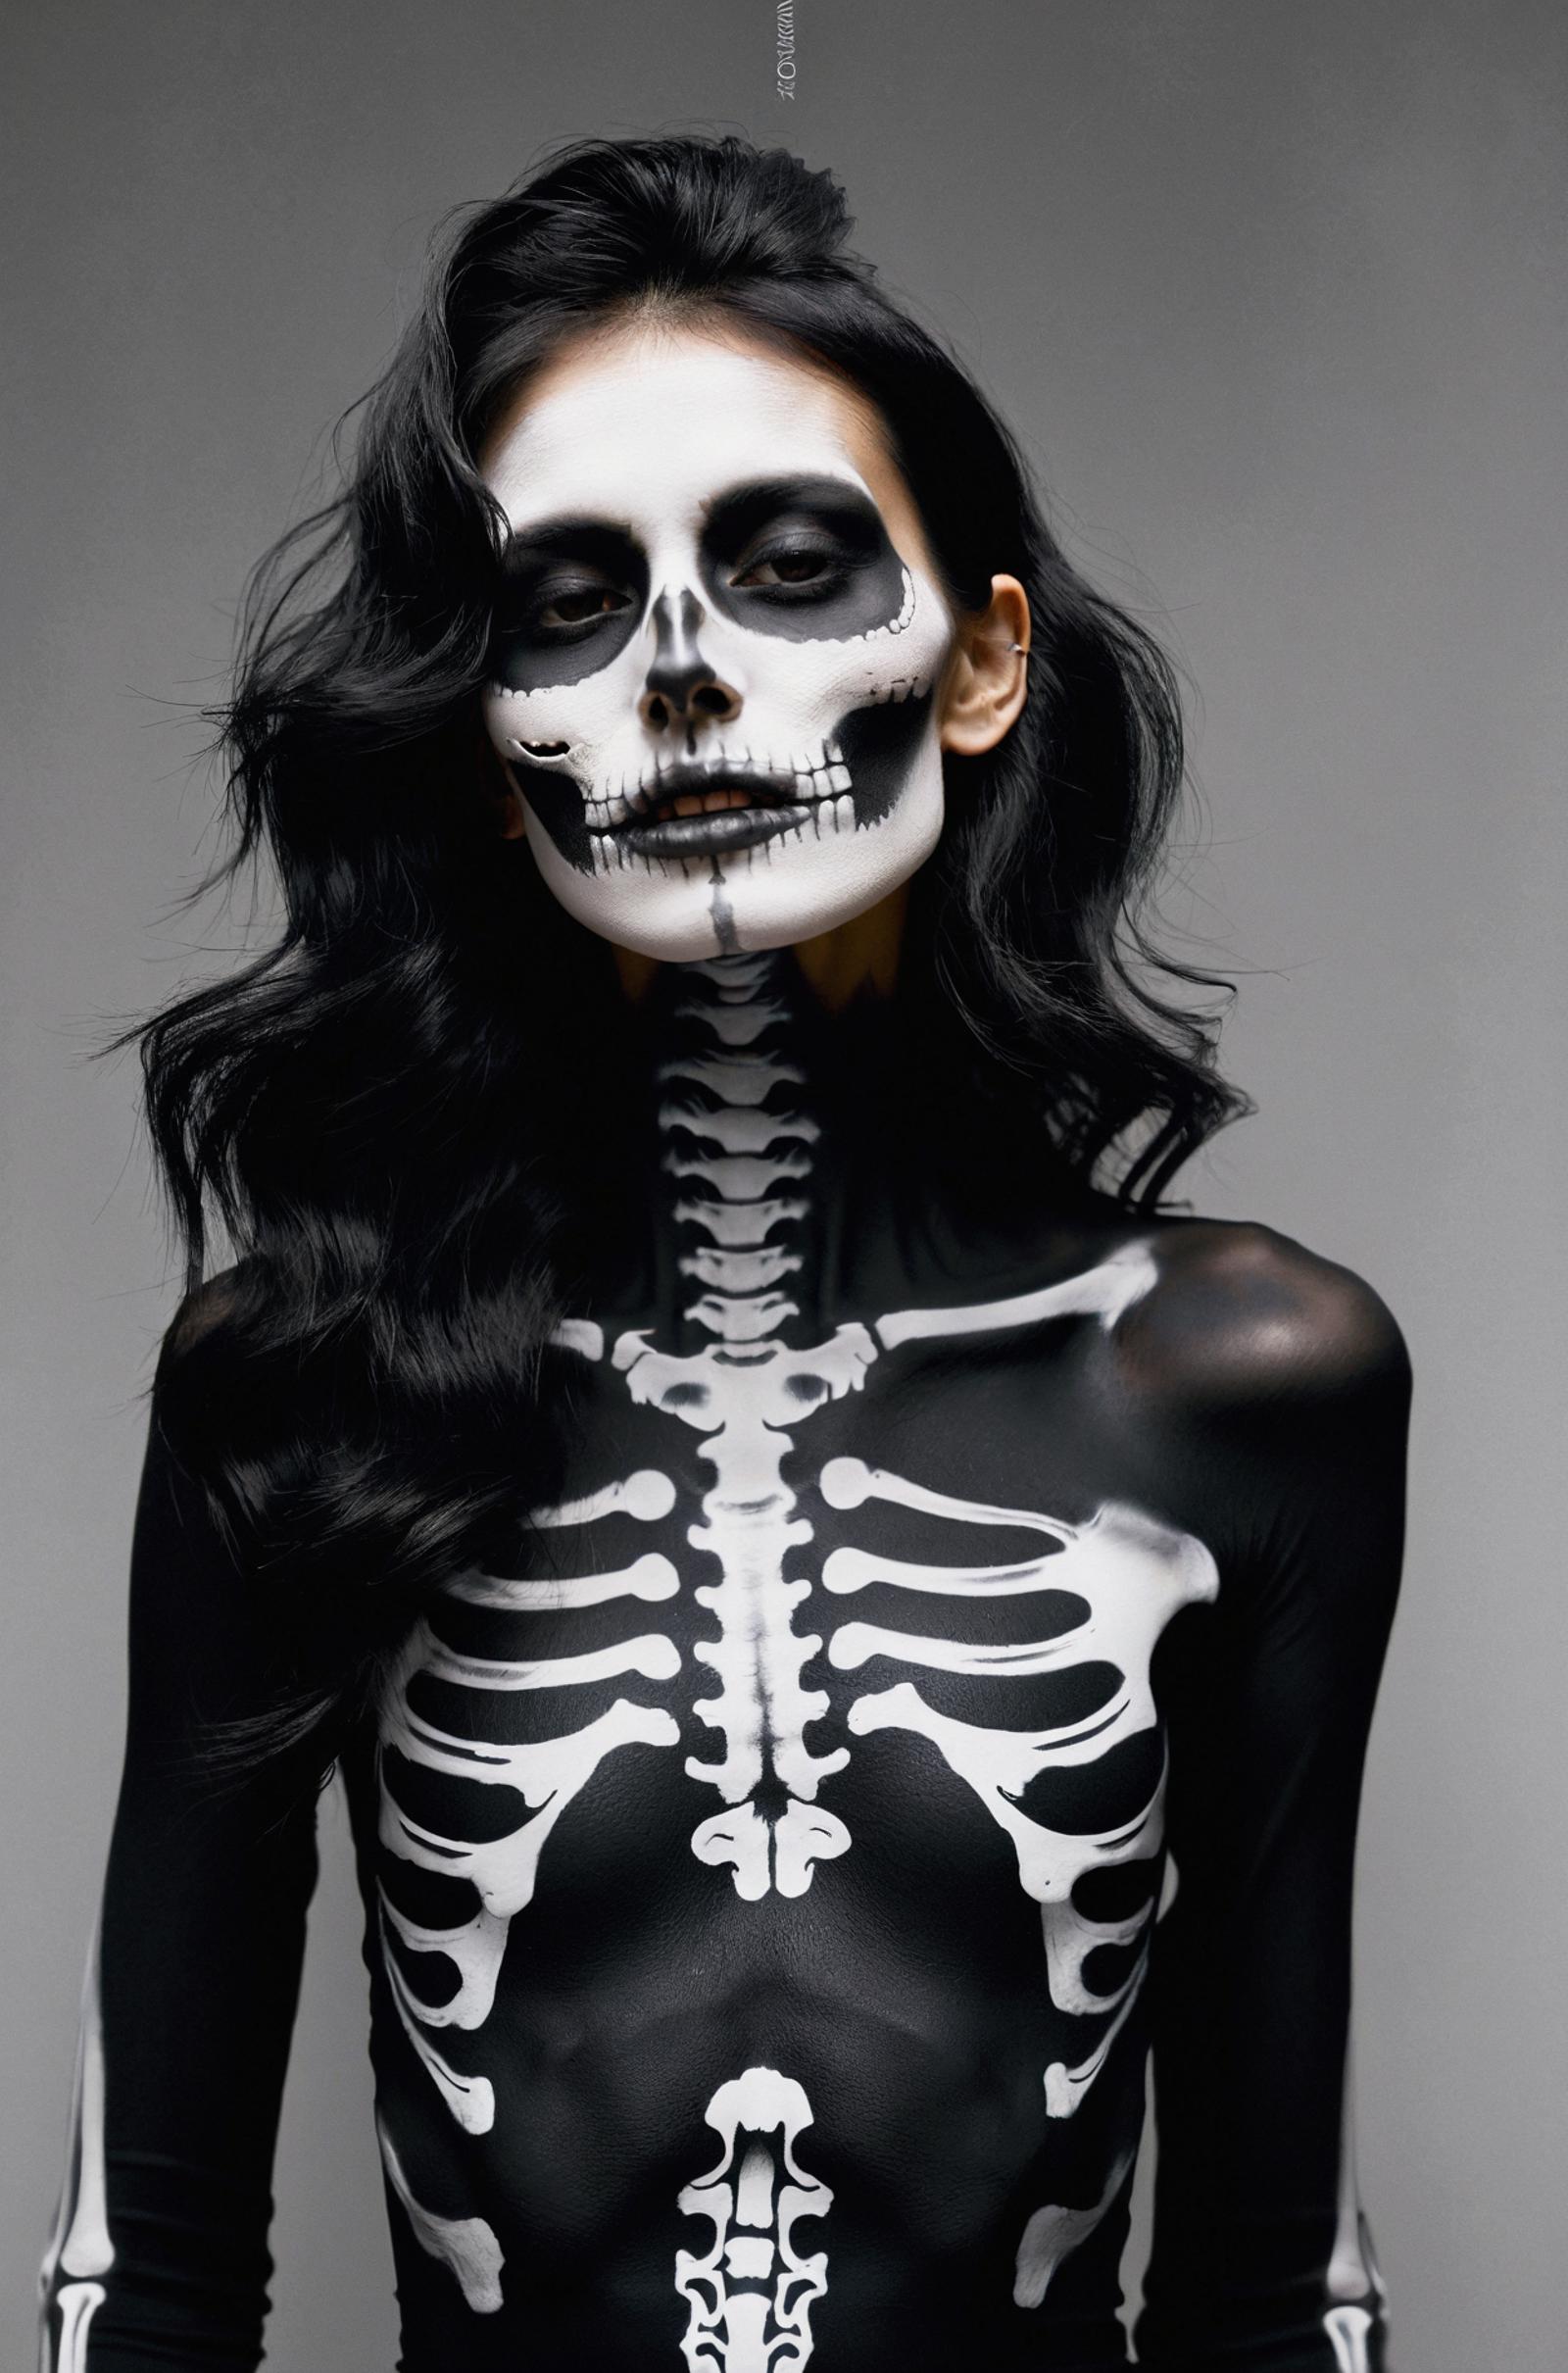 film grain texture,analog photography aesthetic,A woman with skeletal makeup, high-fashion portrait style, striking skull ...